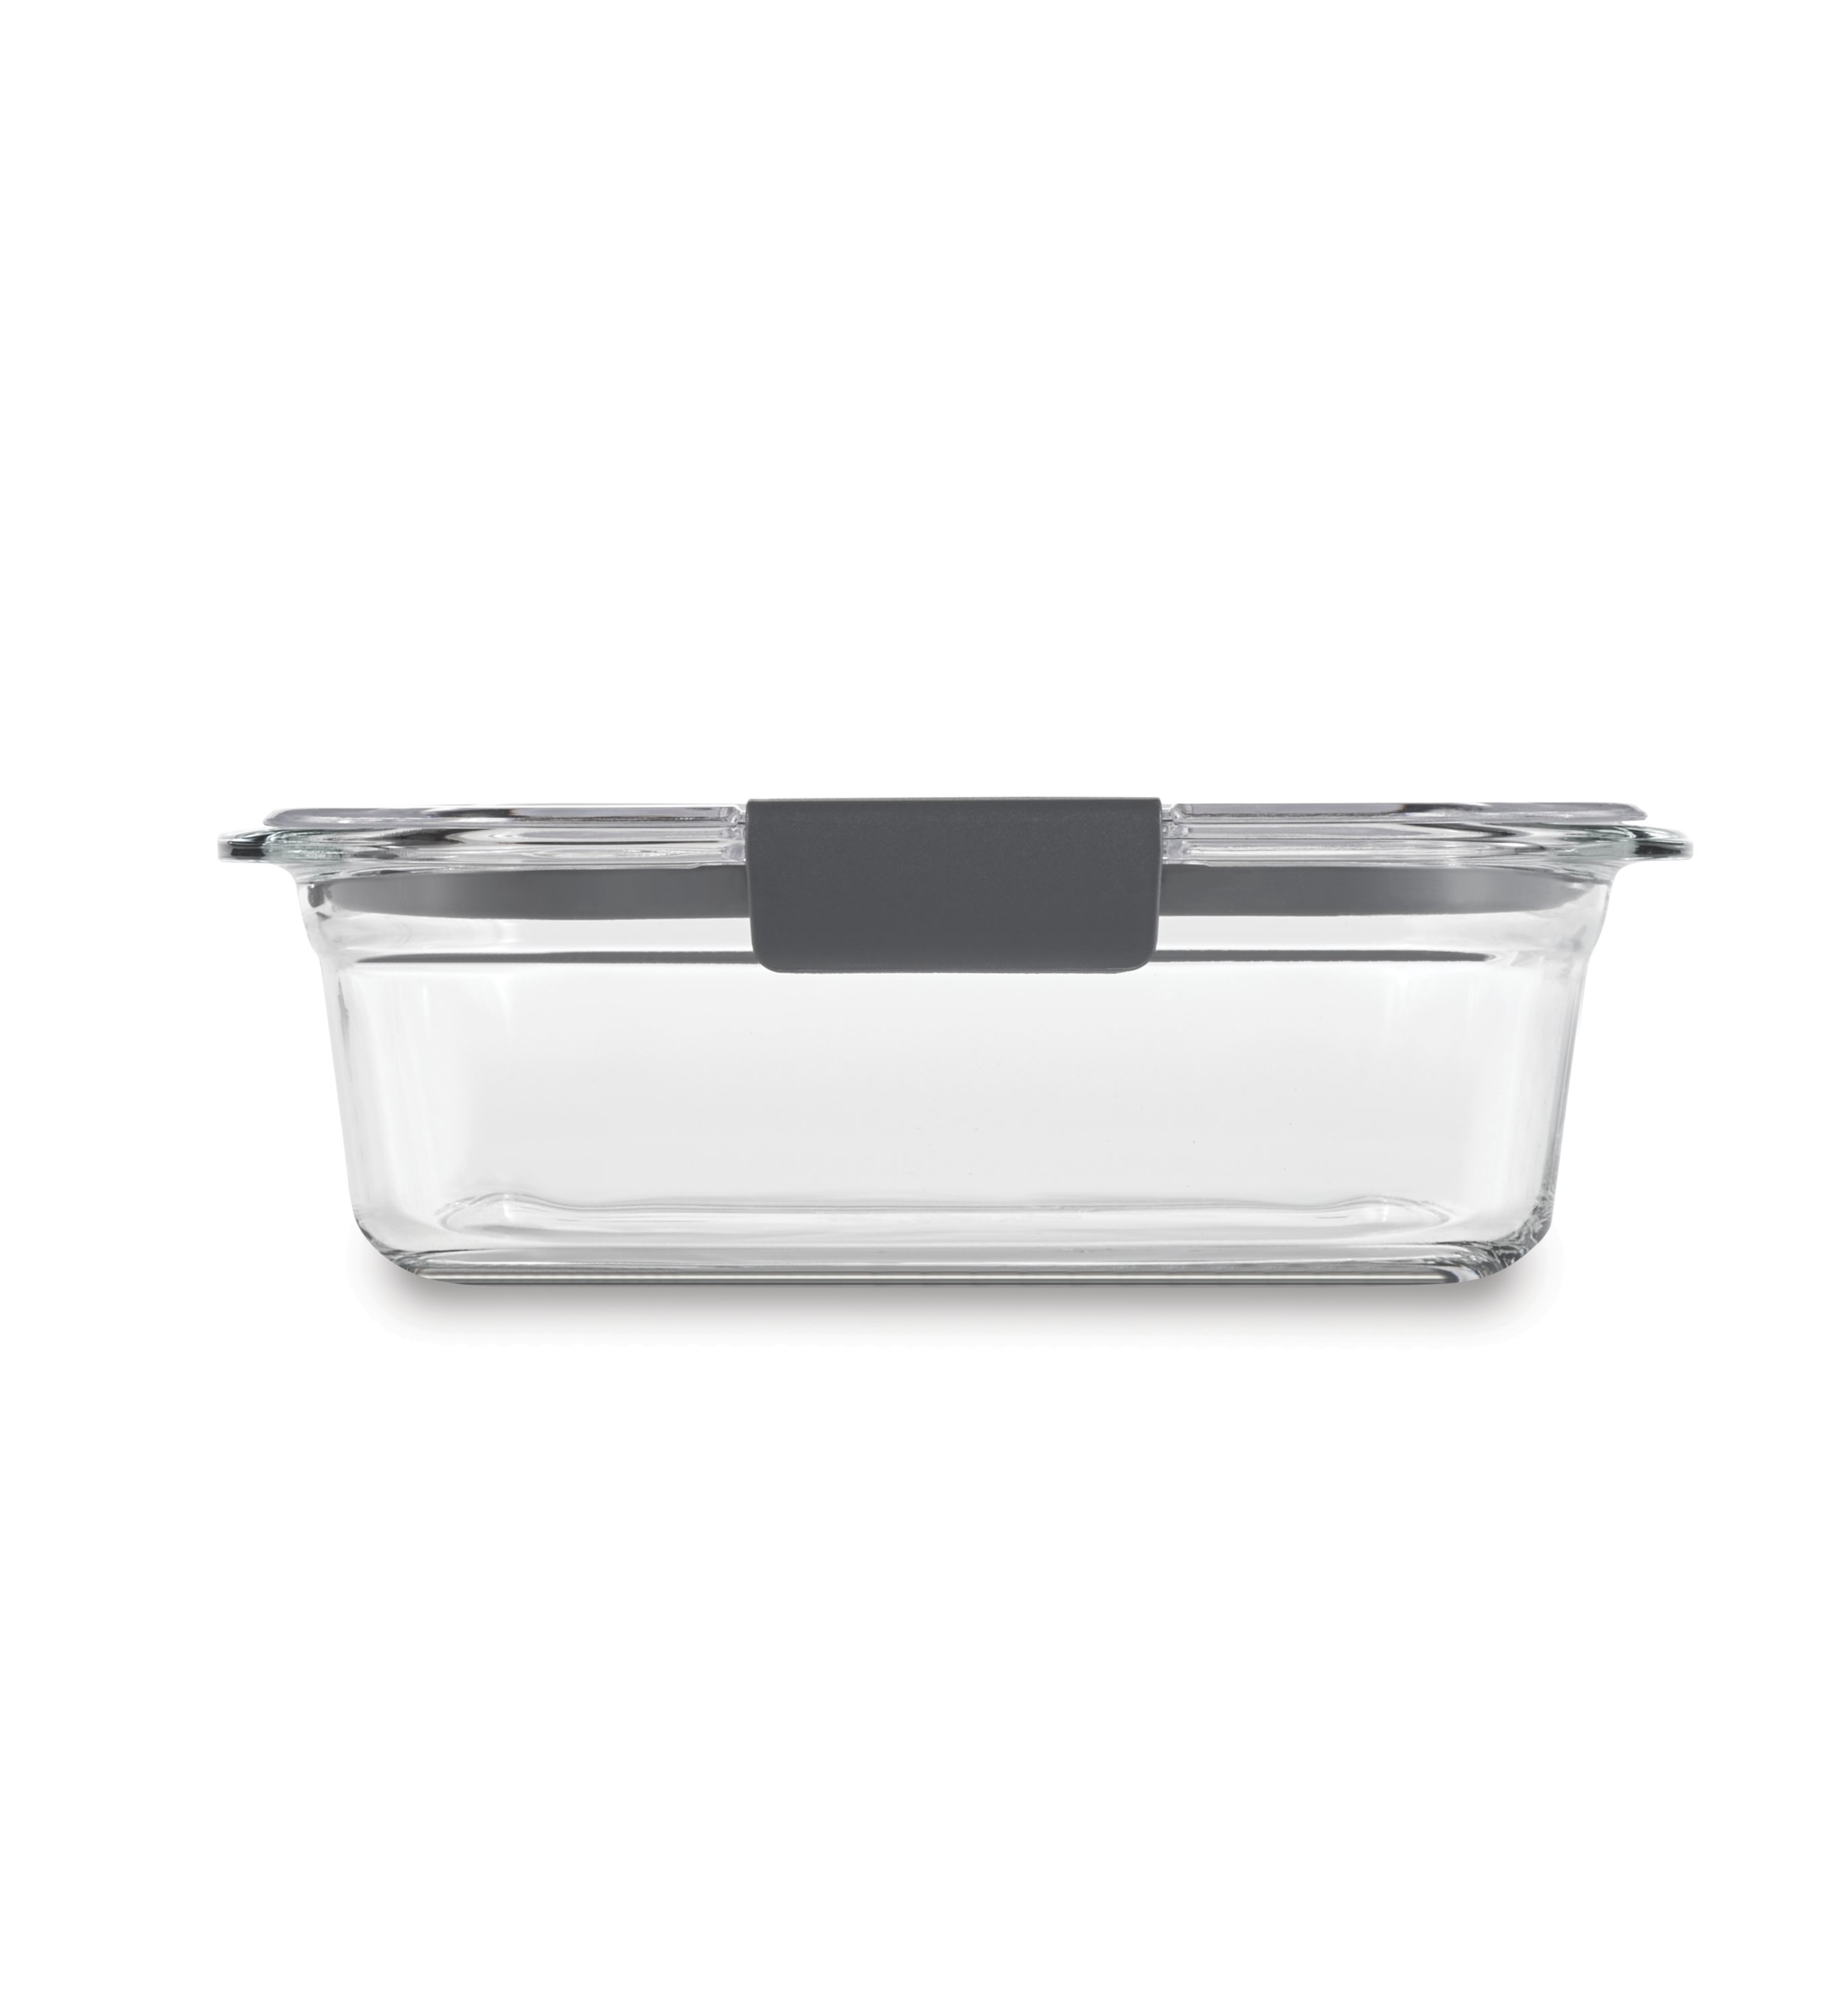  Rubbermaid Brilliance Food Storage Container, Large